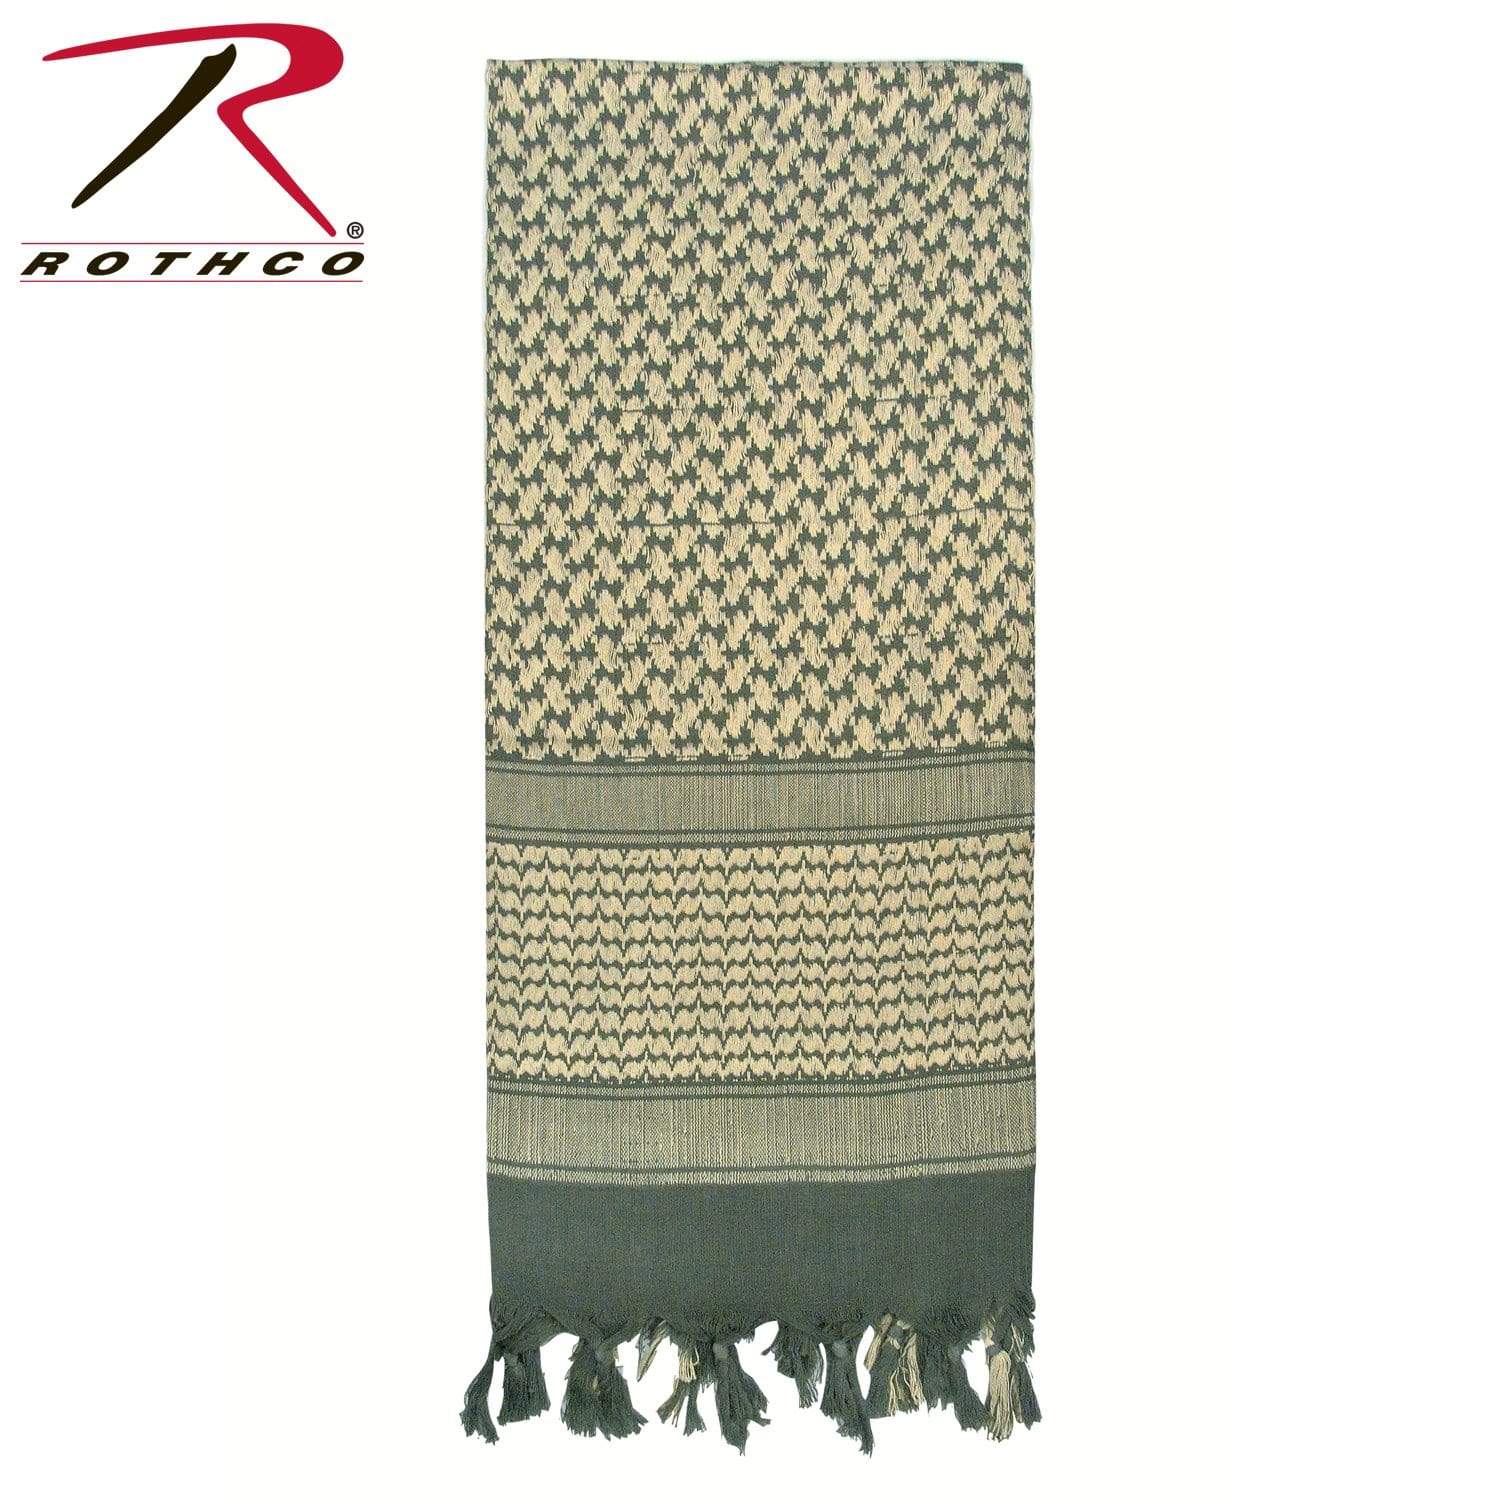 Rothco Shemagh Tactical Desert Keffiyeh Scarf - Foliage Green - Eminent Paintball And Airsoft